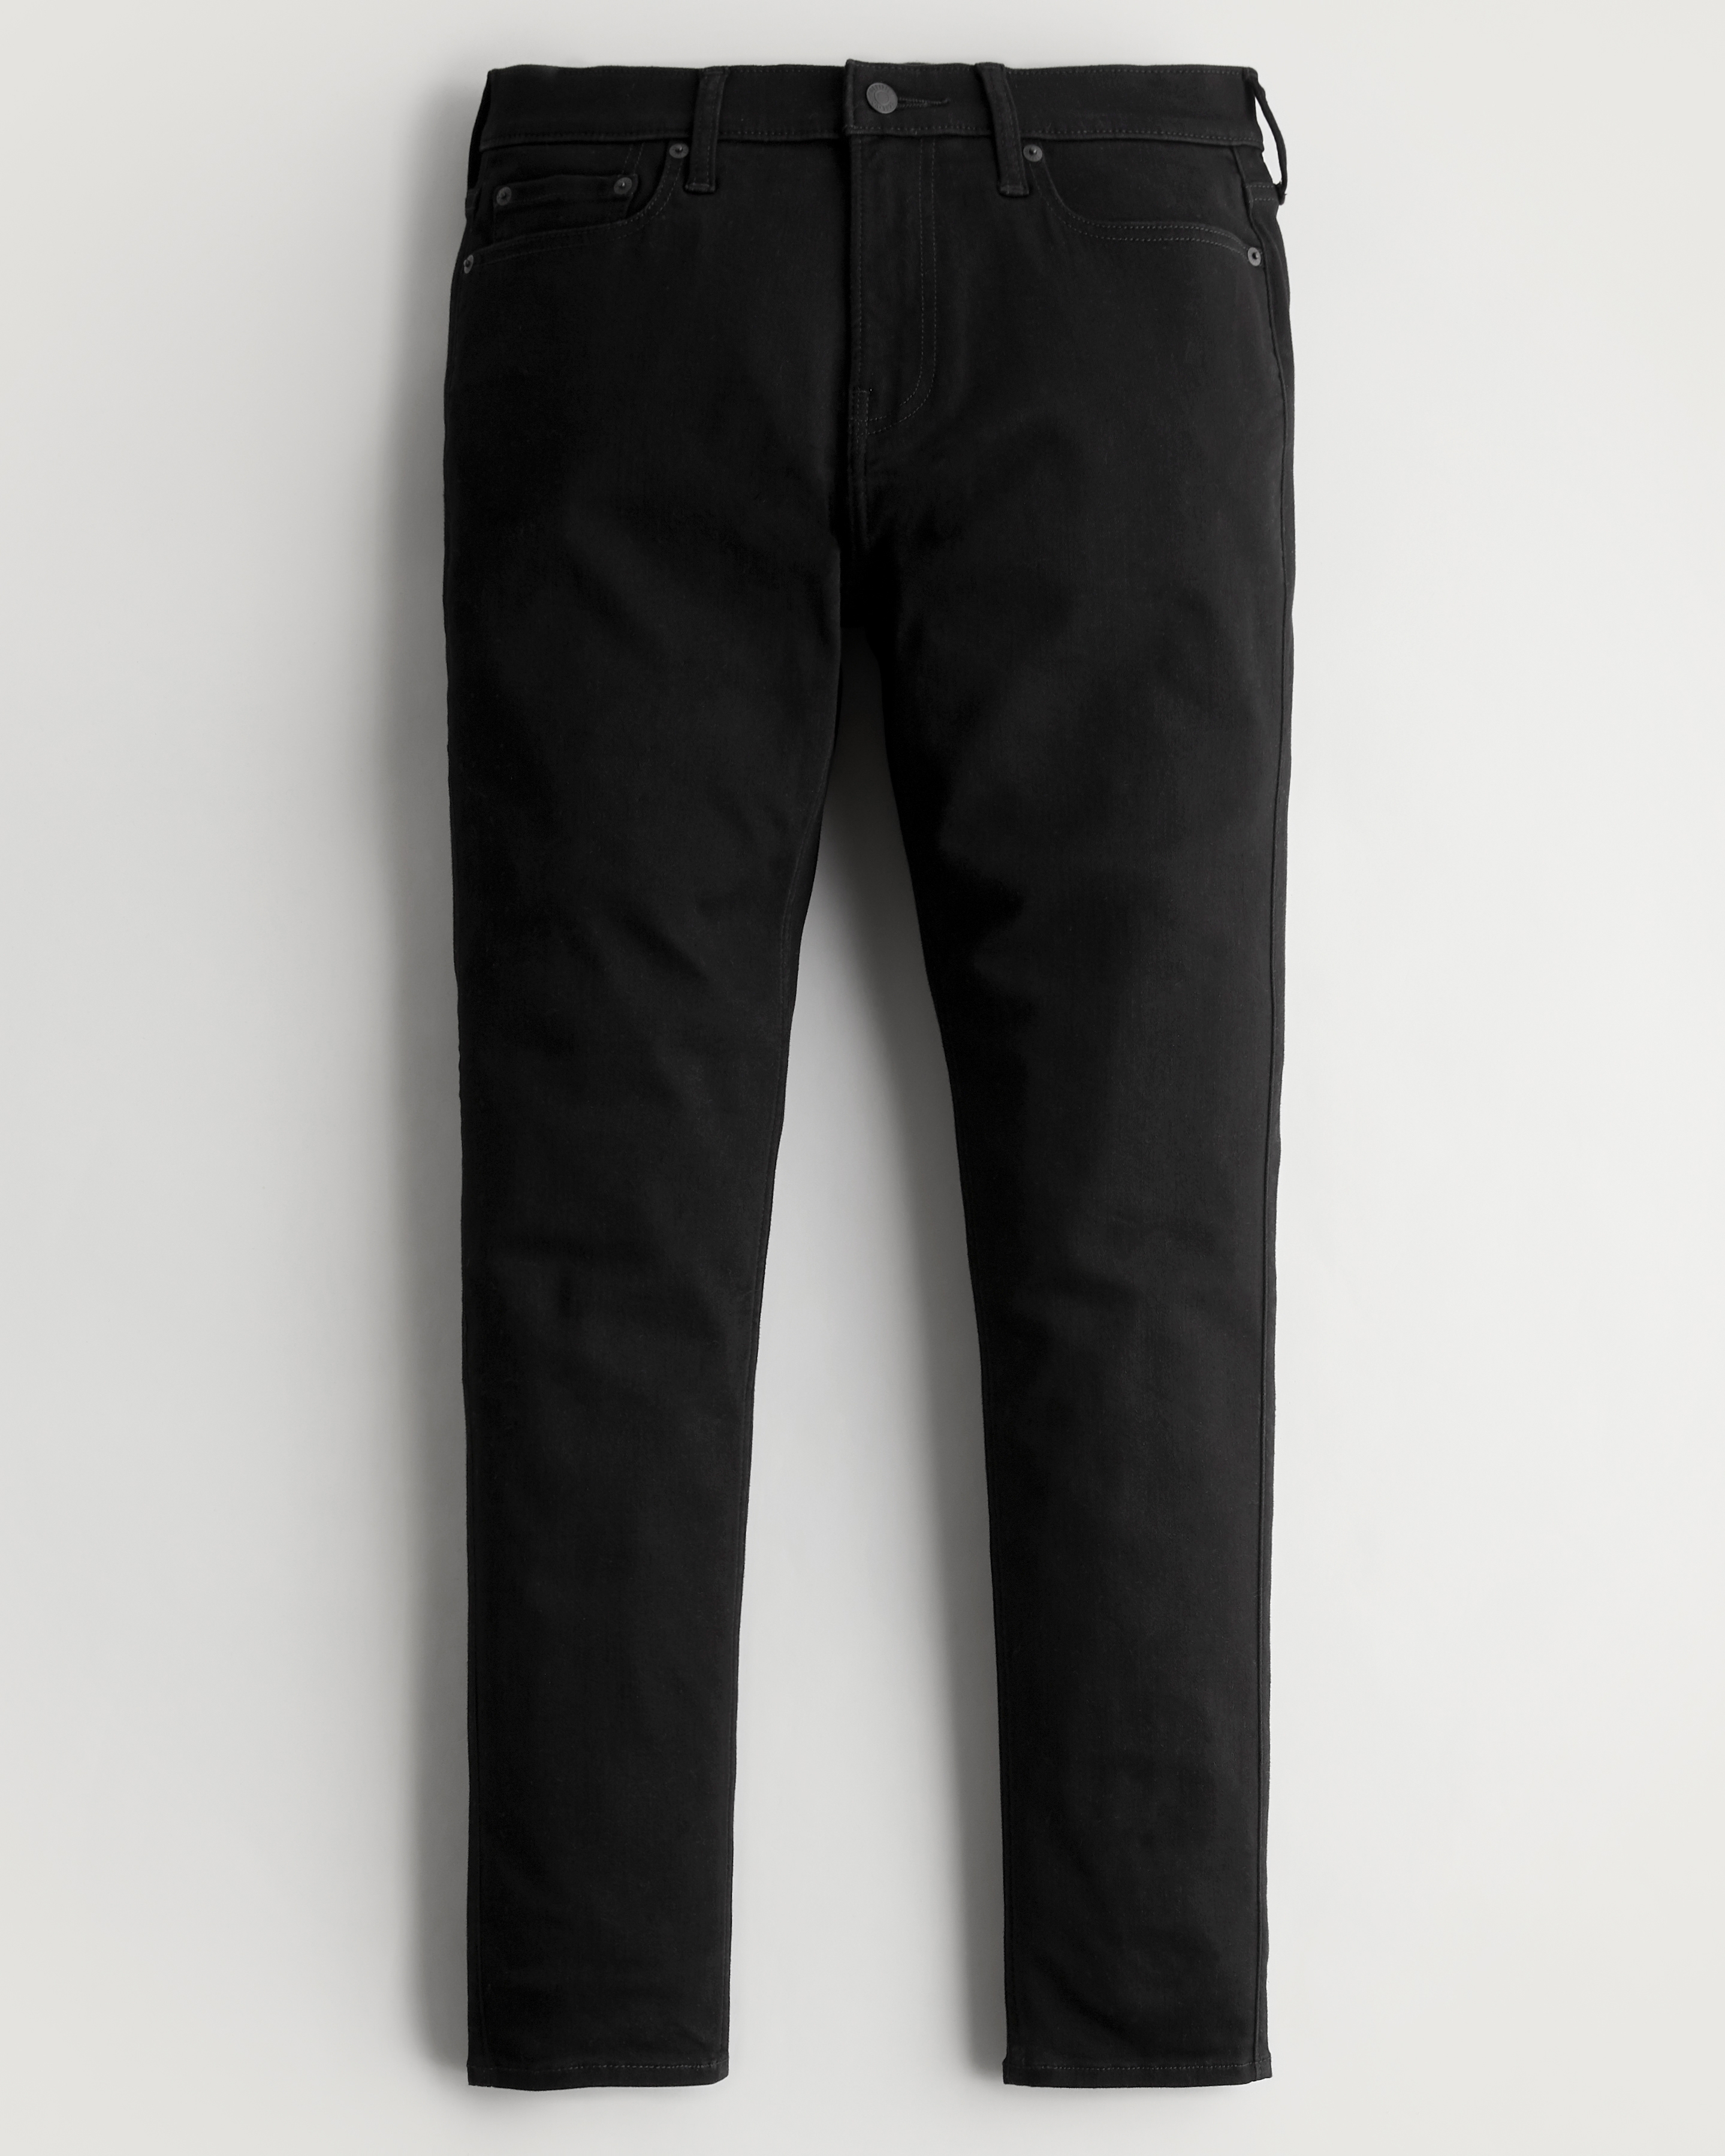 Black No Fade Athletic Skinny Jeans